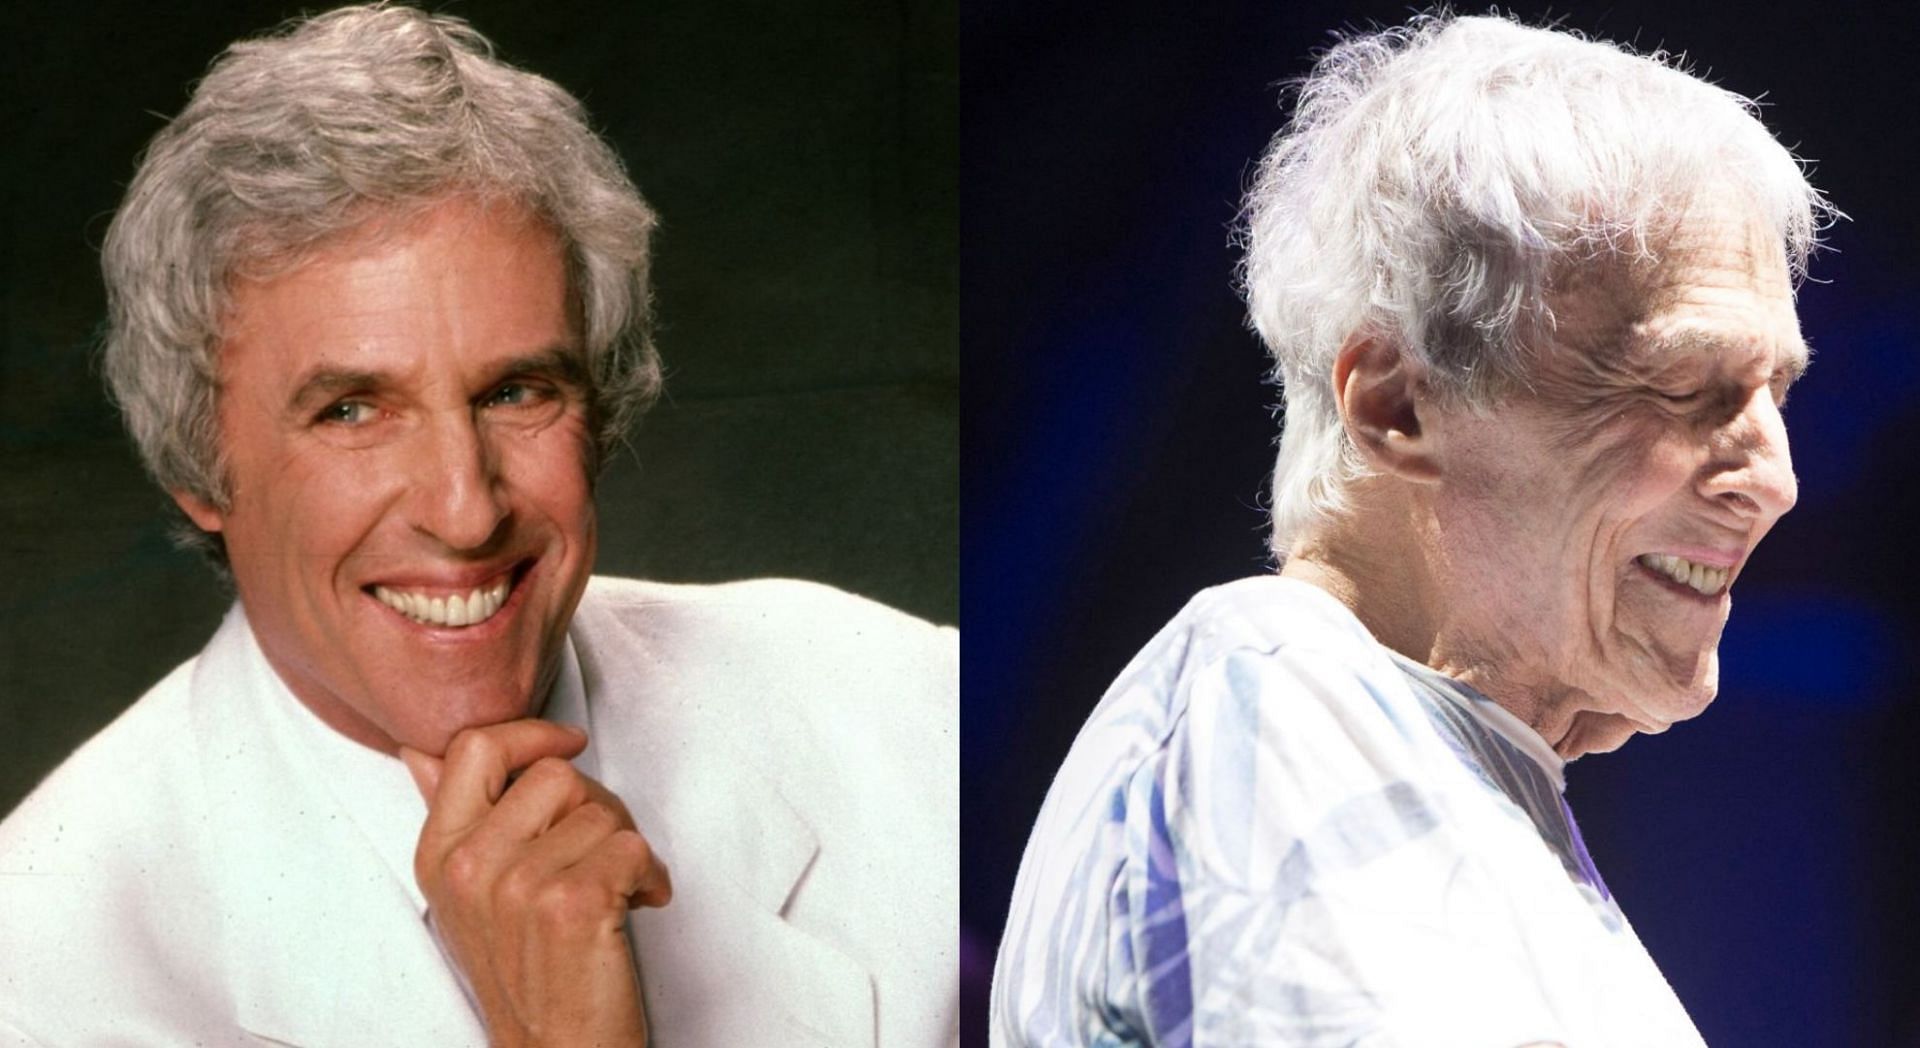 Burt Bacharach passed away from &quot;natural causes&quot; aged 94 (Image via Getty Images)